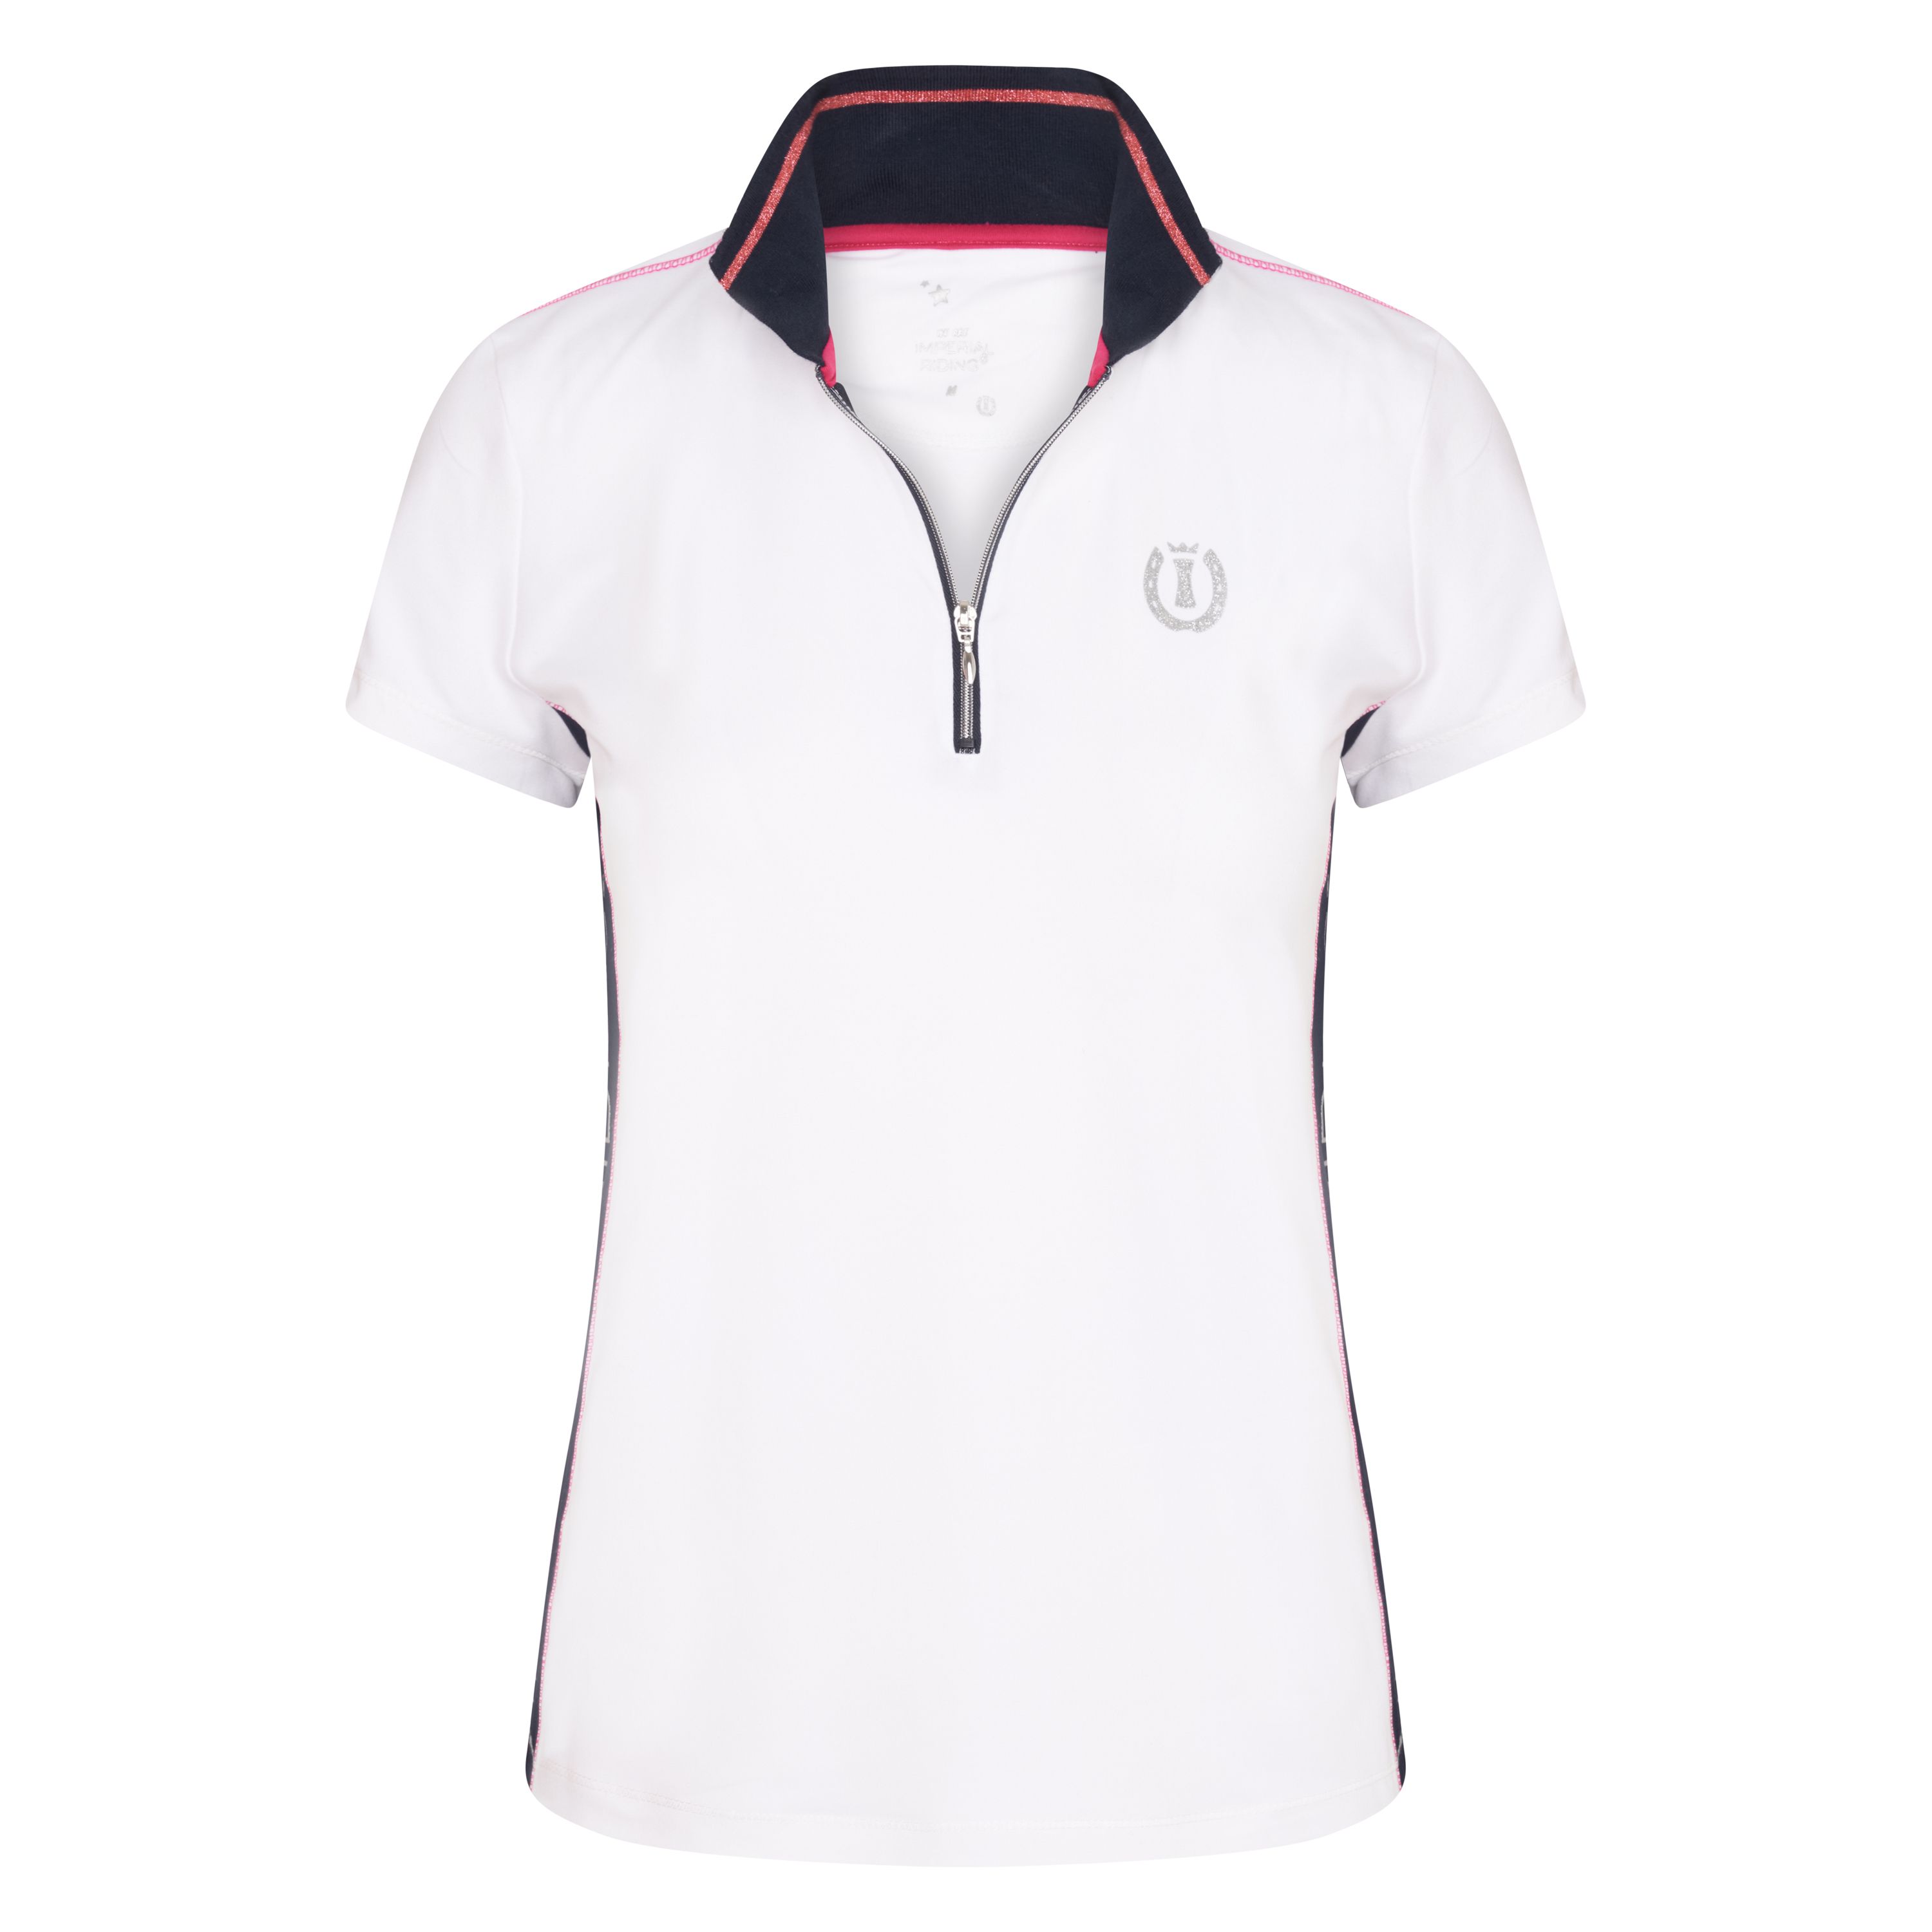 Afbeelding van Imperial Riding Polo shirt irhruby